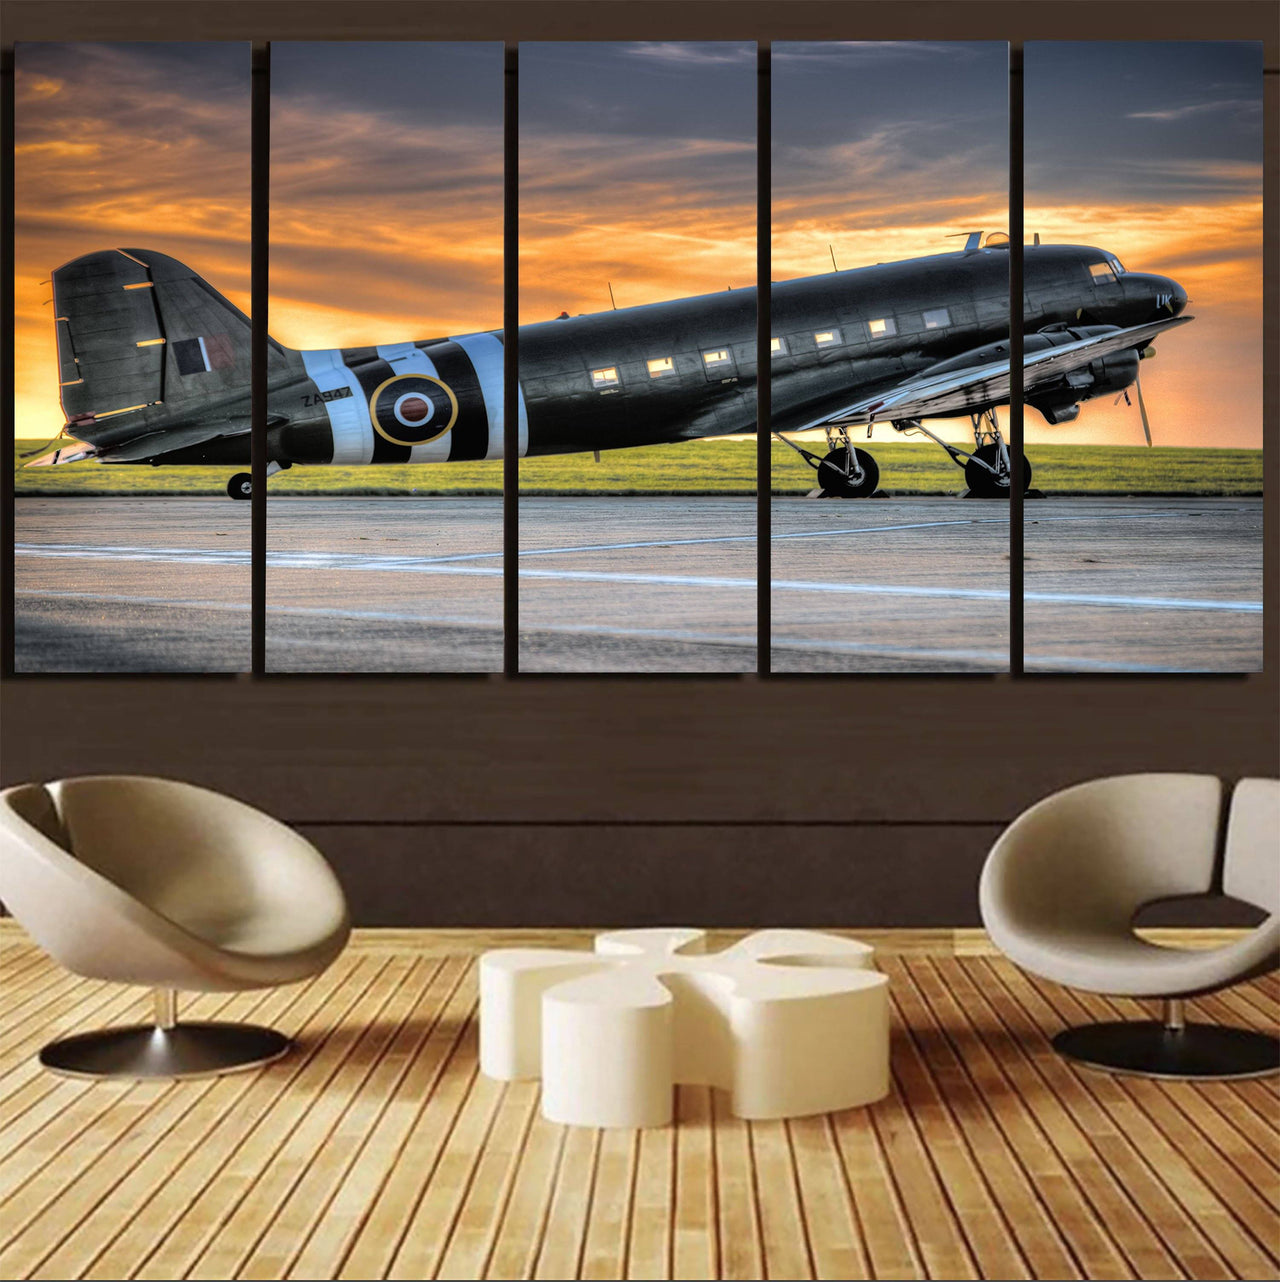 Old Airplane Parked During Sunset Printed Canvas Prints (5 Pieces) Aviation Shop 